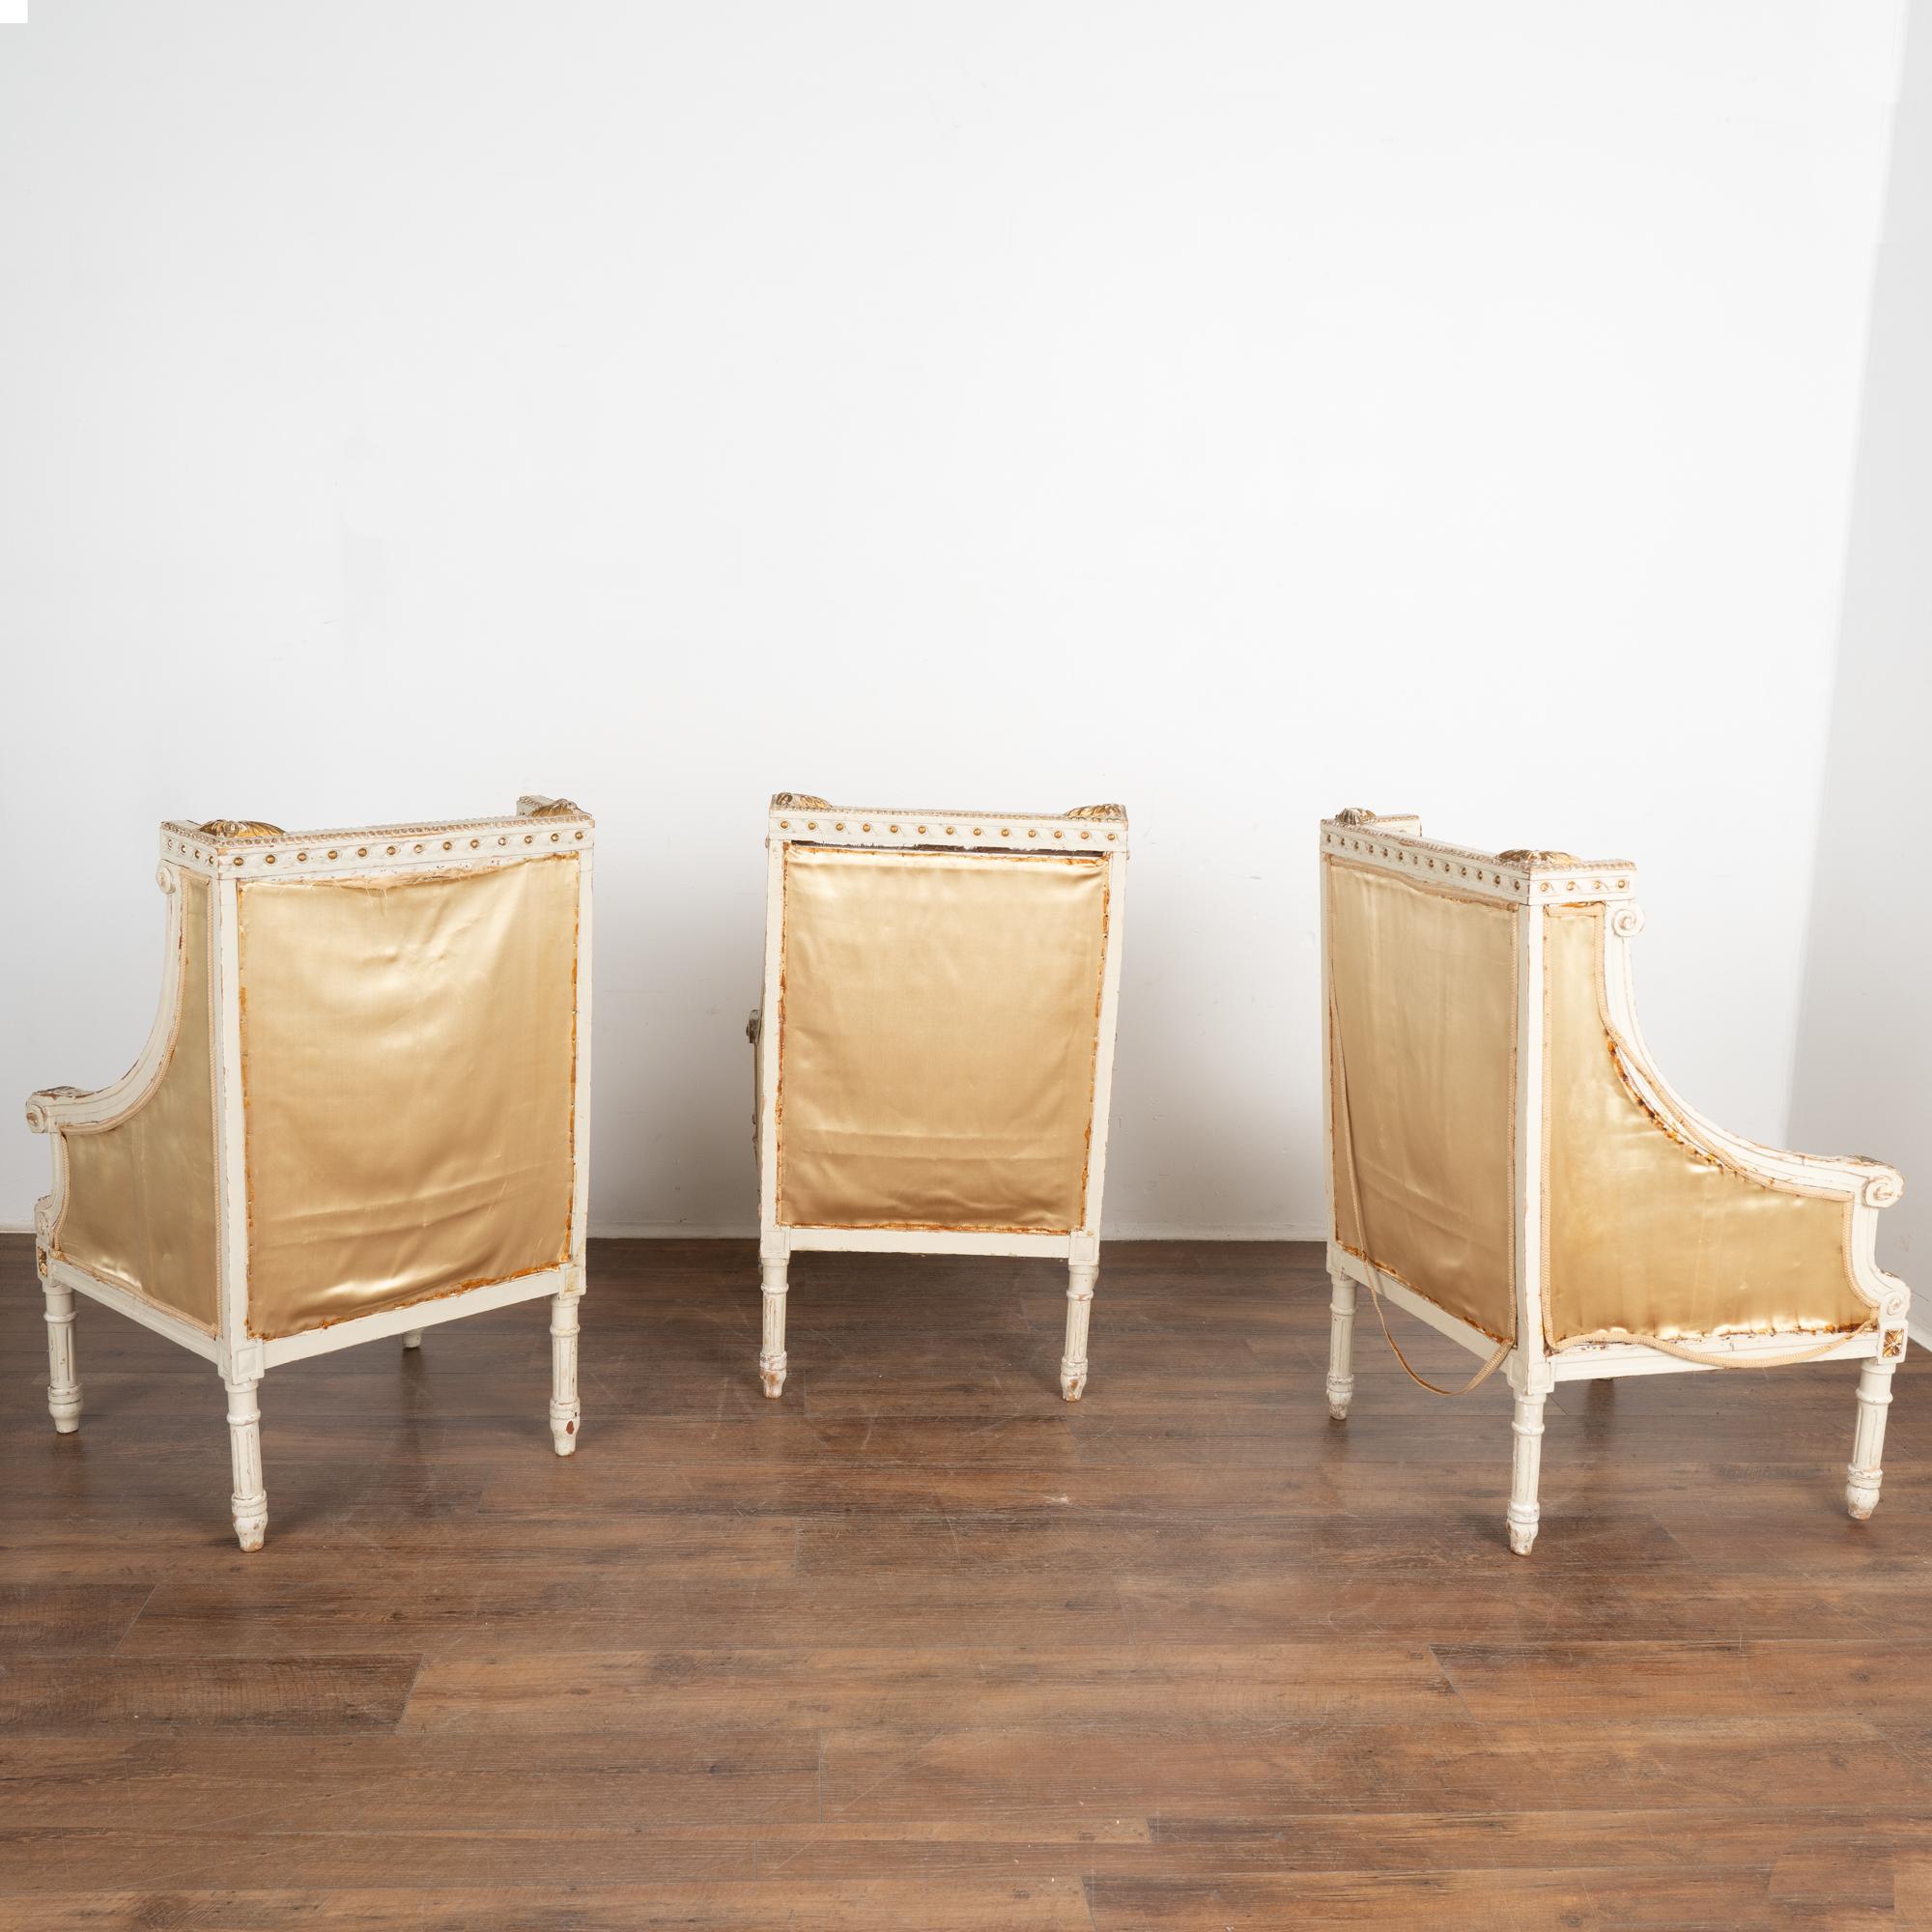 Set of Three White and Gold Arm Chairs, France circa 1890 For Sale 6